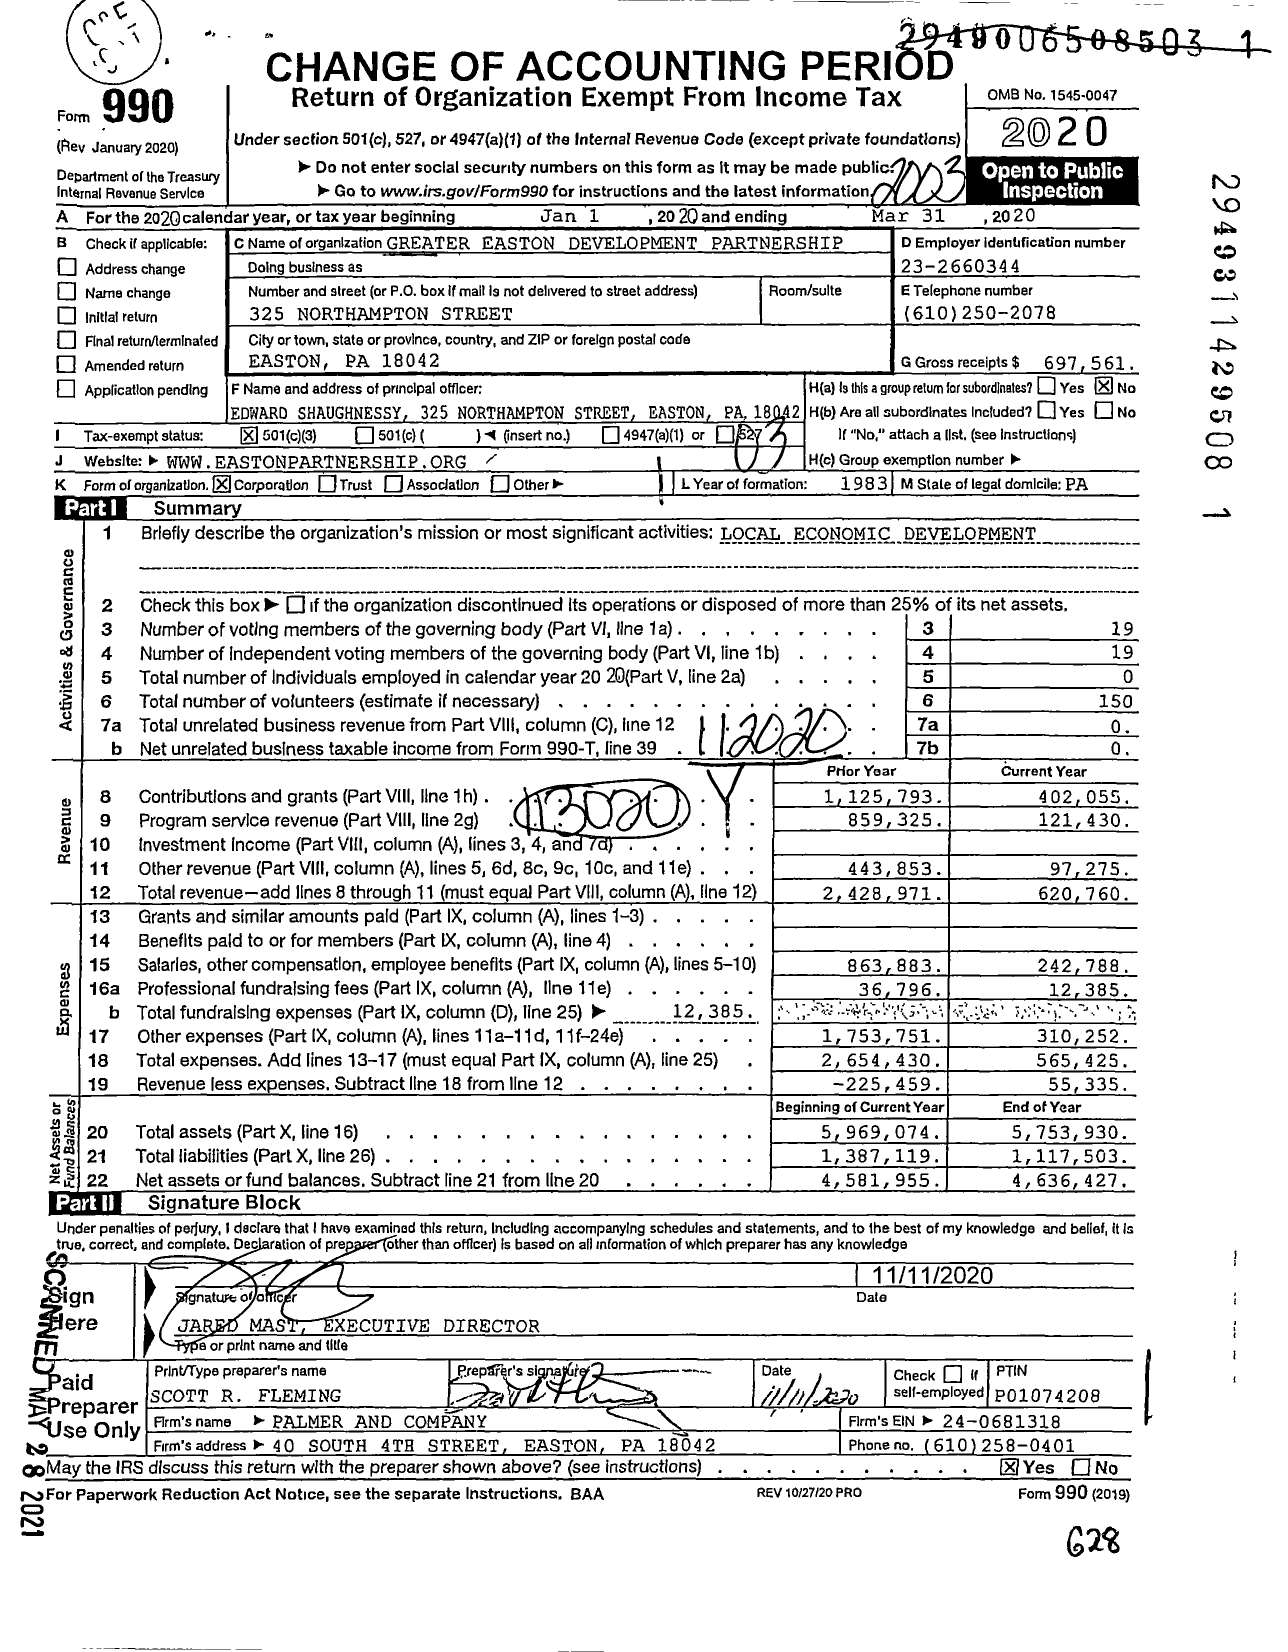 Image of first page of 2019 Form 990 for Greater Easton Development Partnership